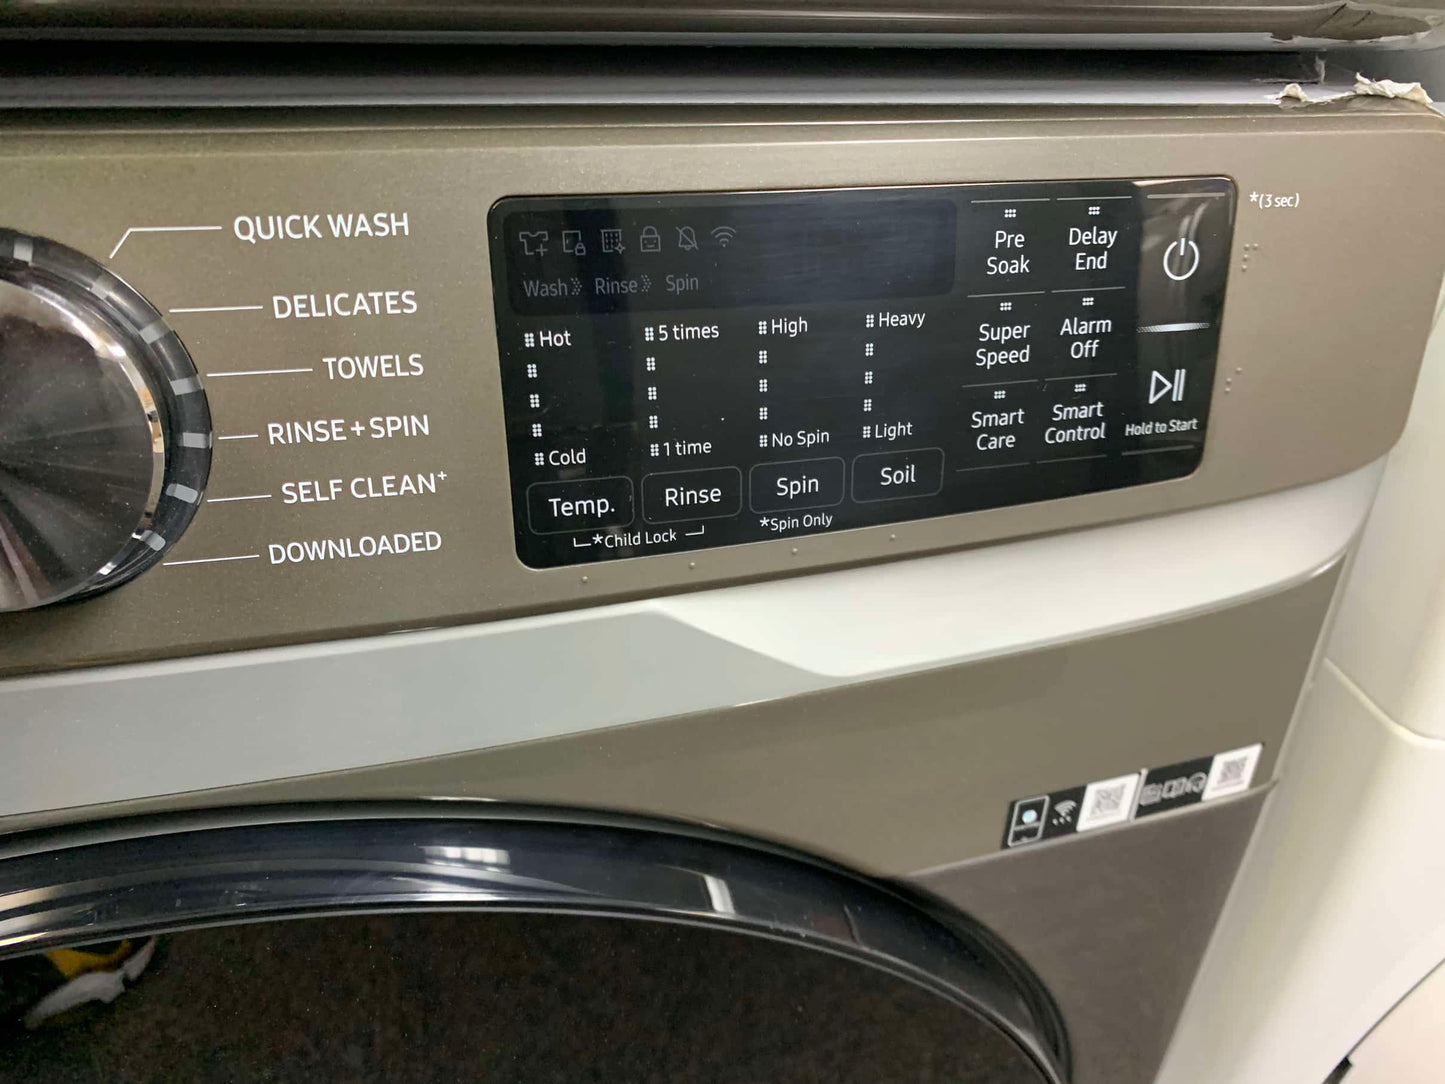 ★ Samsung Open Box 4.5 cu. ft. Smart High-Efficiency Front Load Washer with Super Speed  & 7.5 cu. ft. Smart Stackable Vented GAS Dryer with Steam Sanitize+ in champagne 27 in WD739